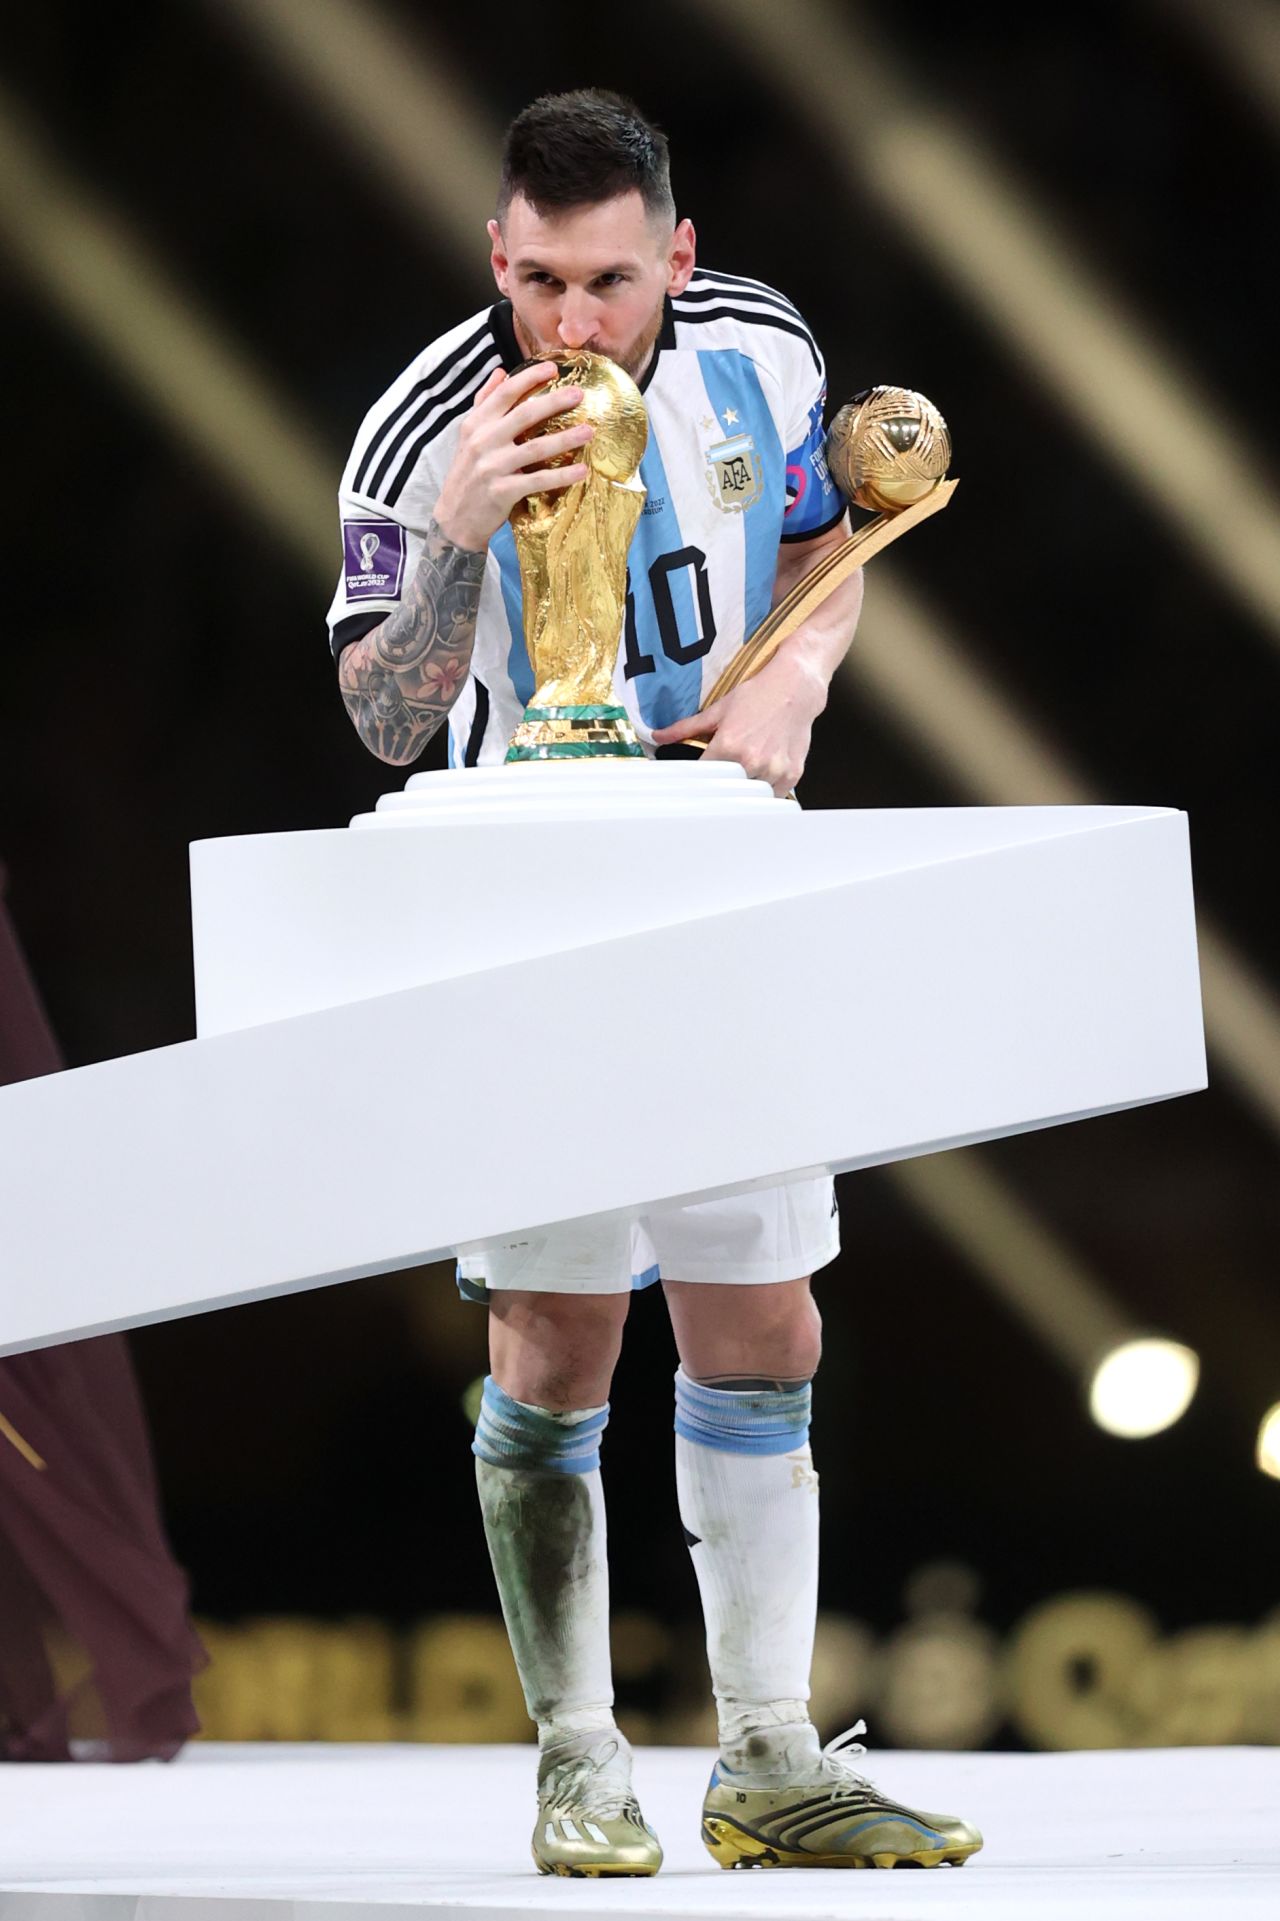 Messi holds the Golden Ball trophy, awarded to the tournament's top player, while kissing the World Cup trophy.